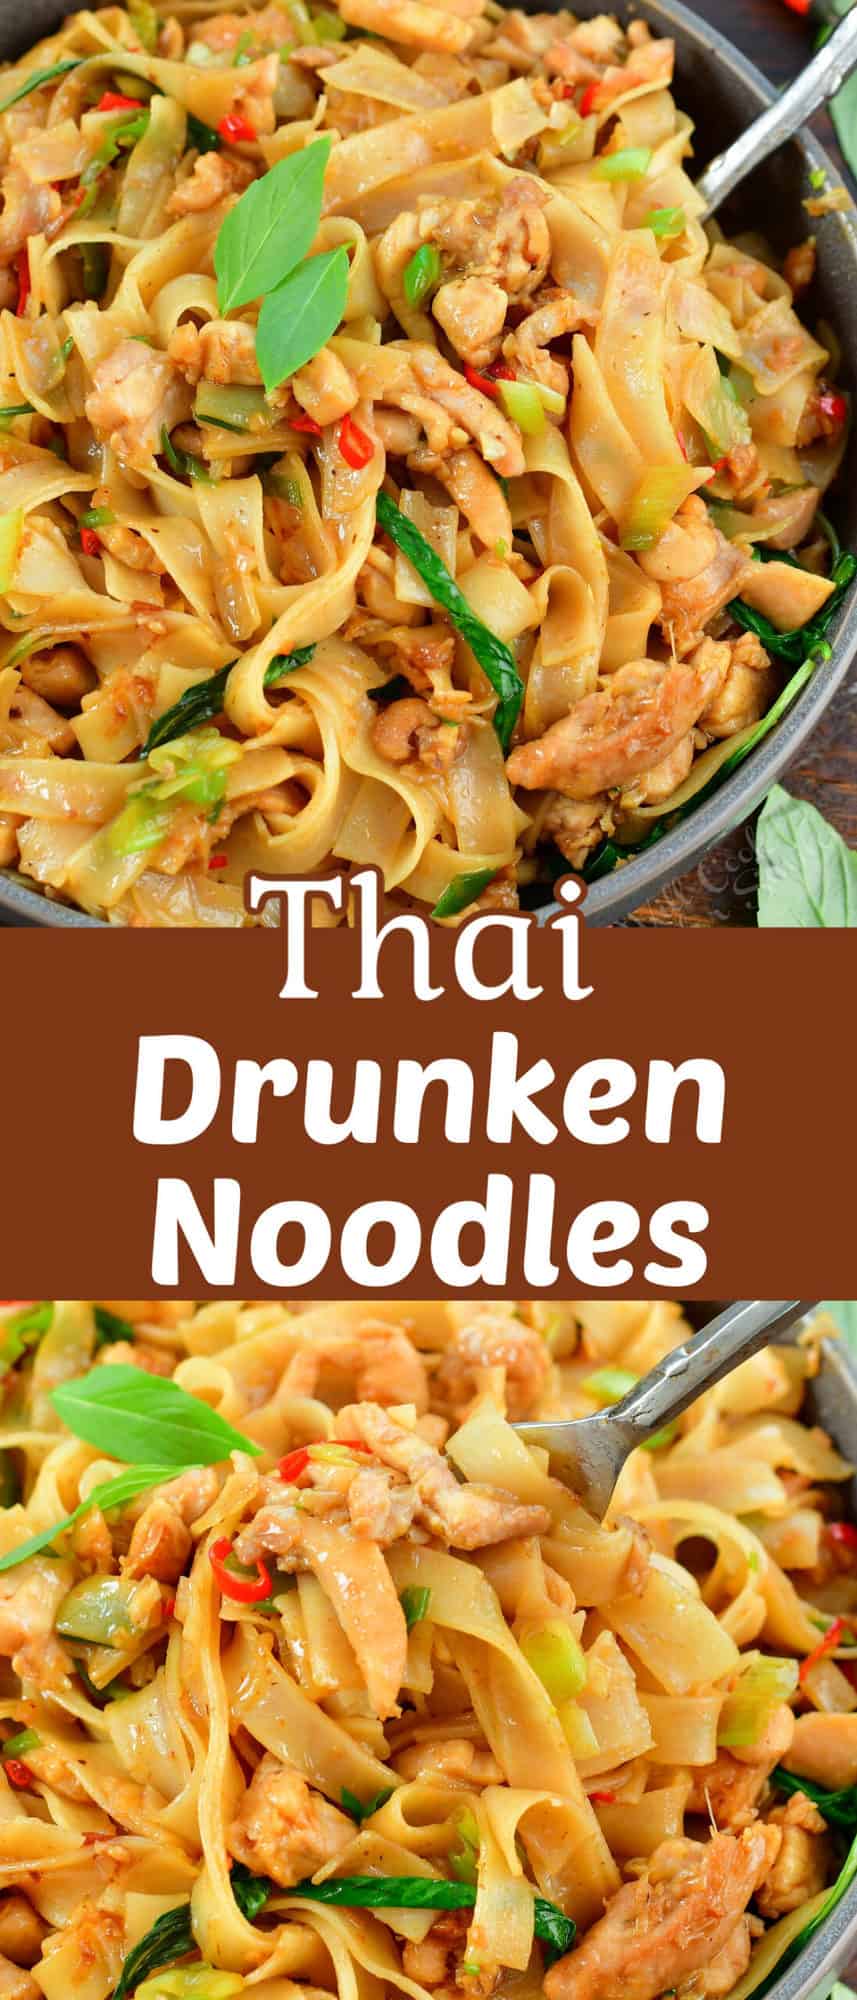 collage of two images of Drunken Noodles in a bowl close up